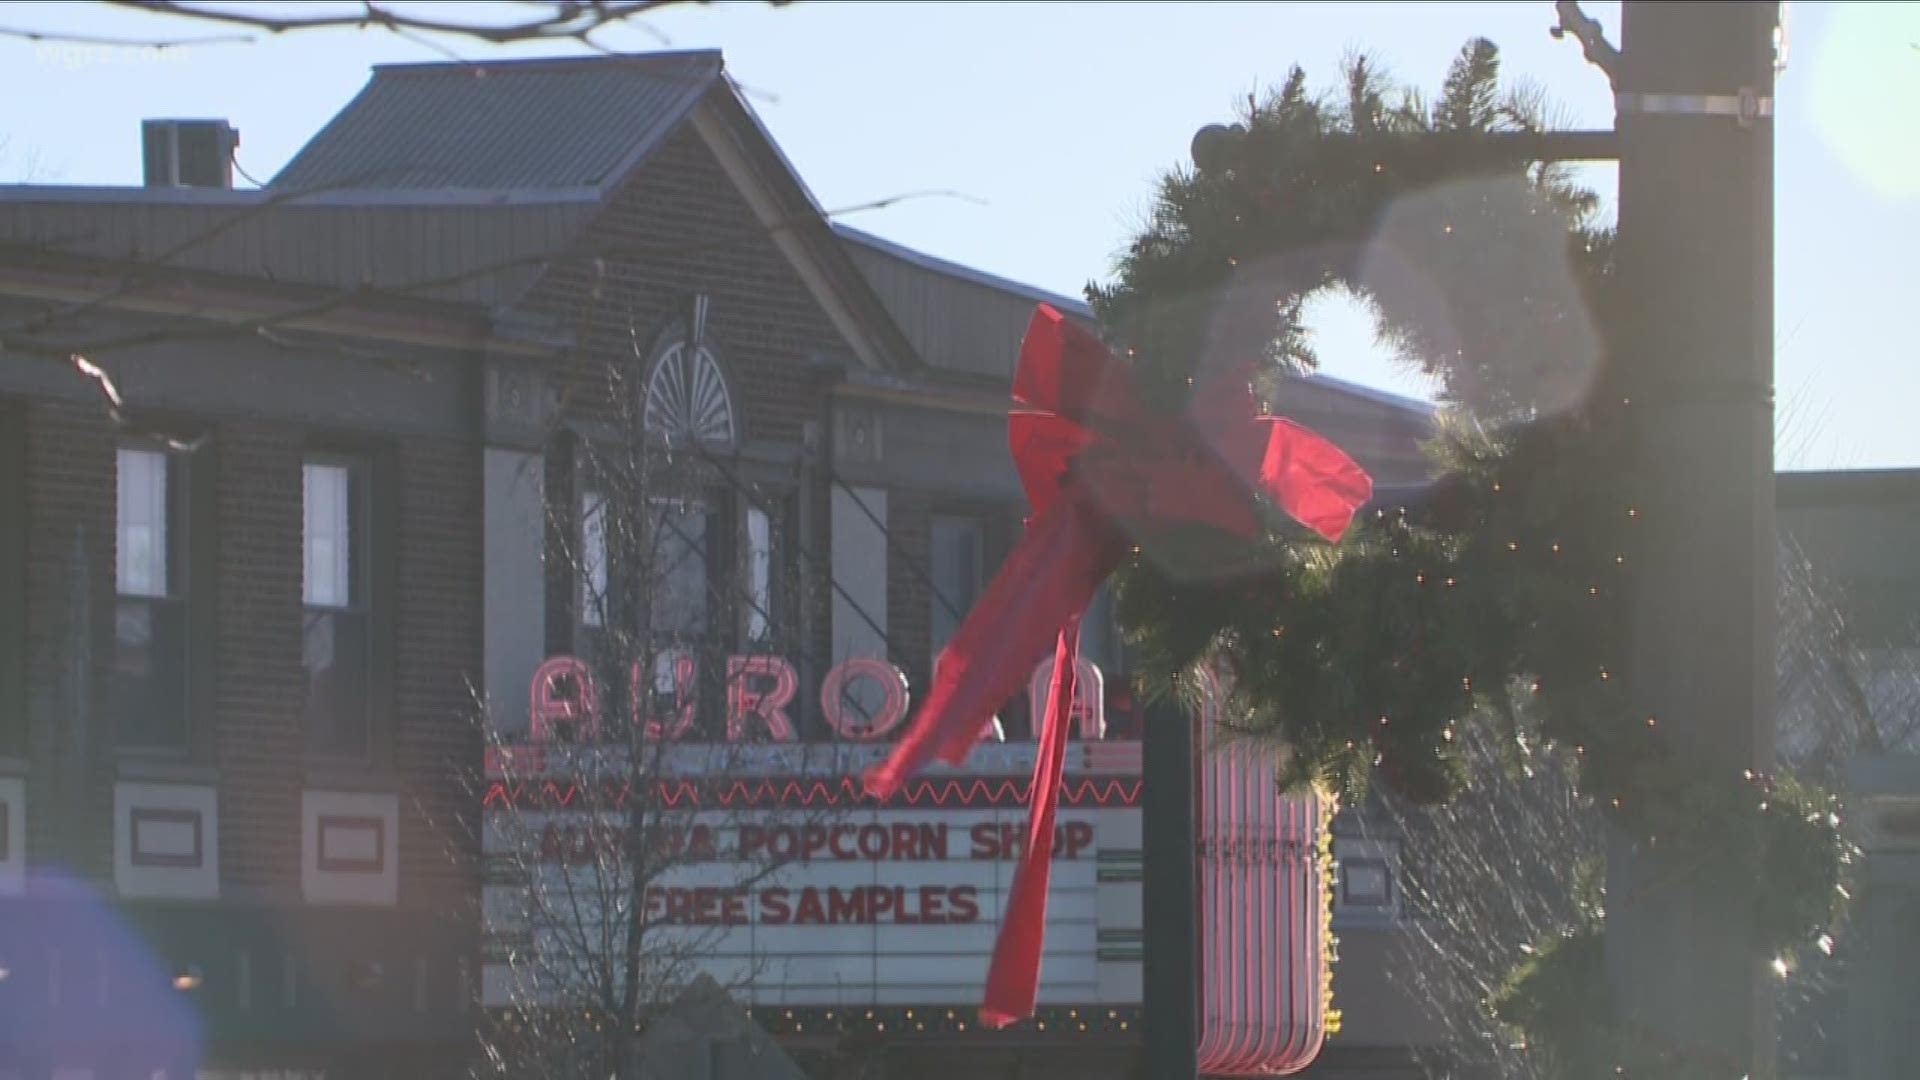 New Movie Called " A Special Christmas Dinner" being shot in east aurora